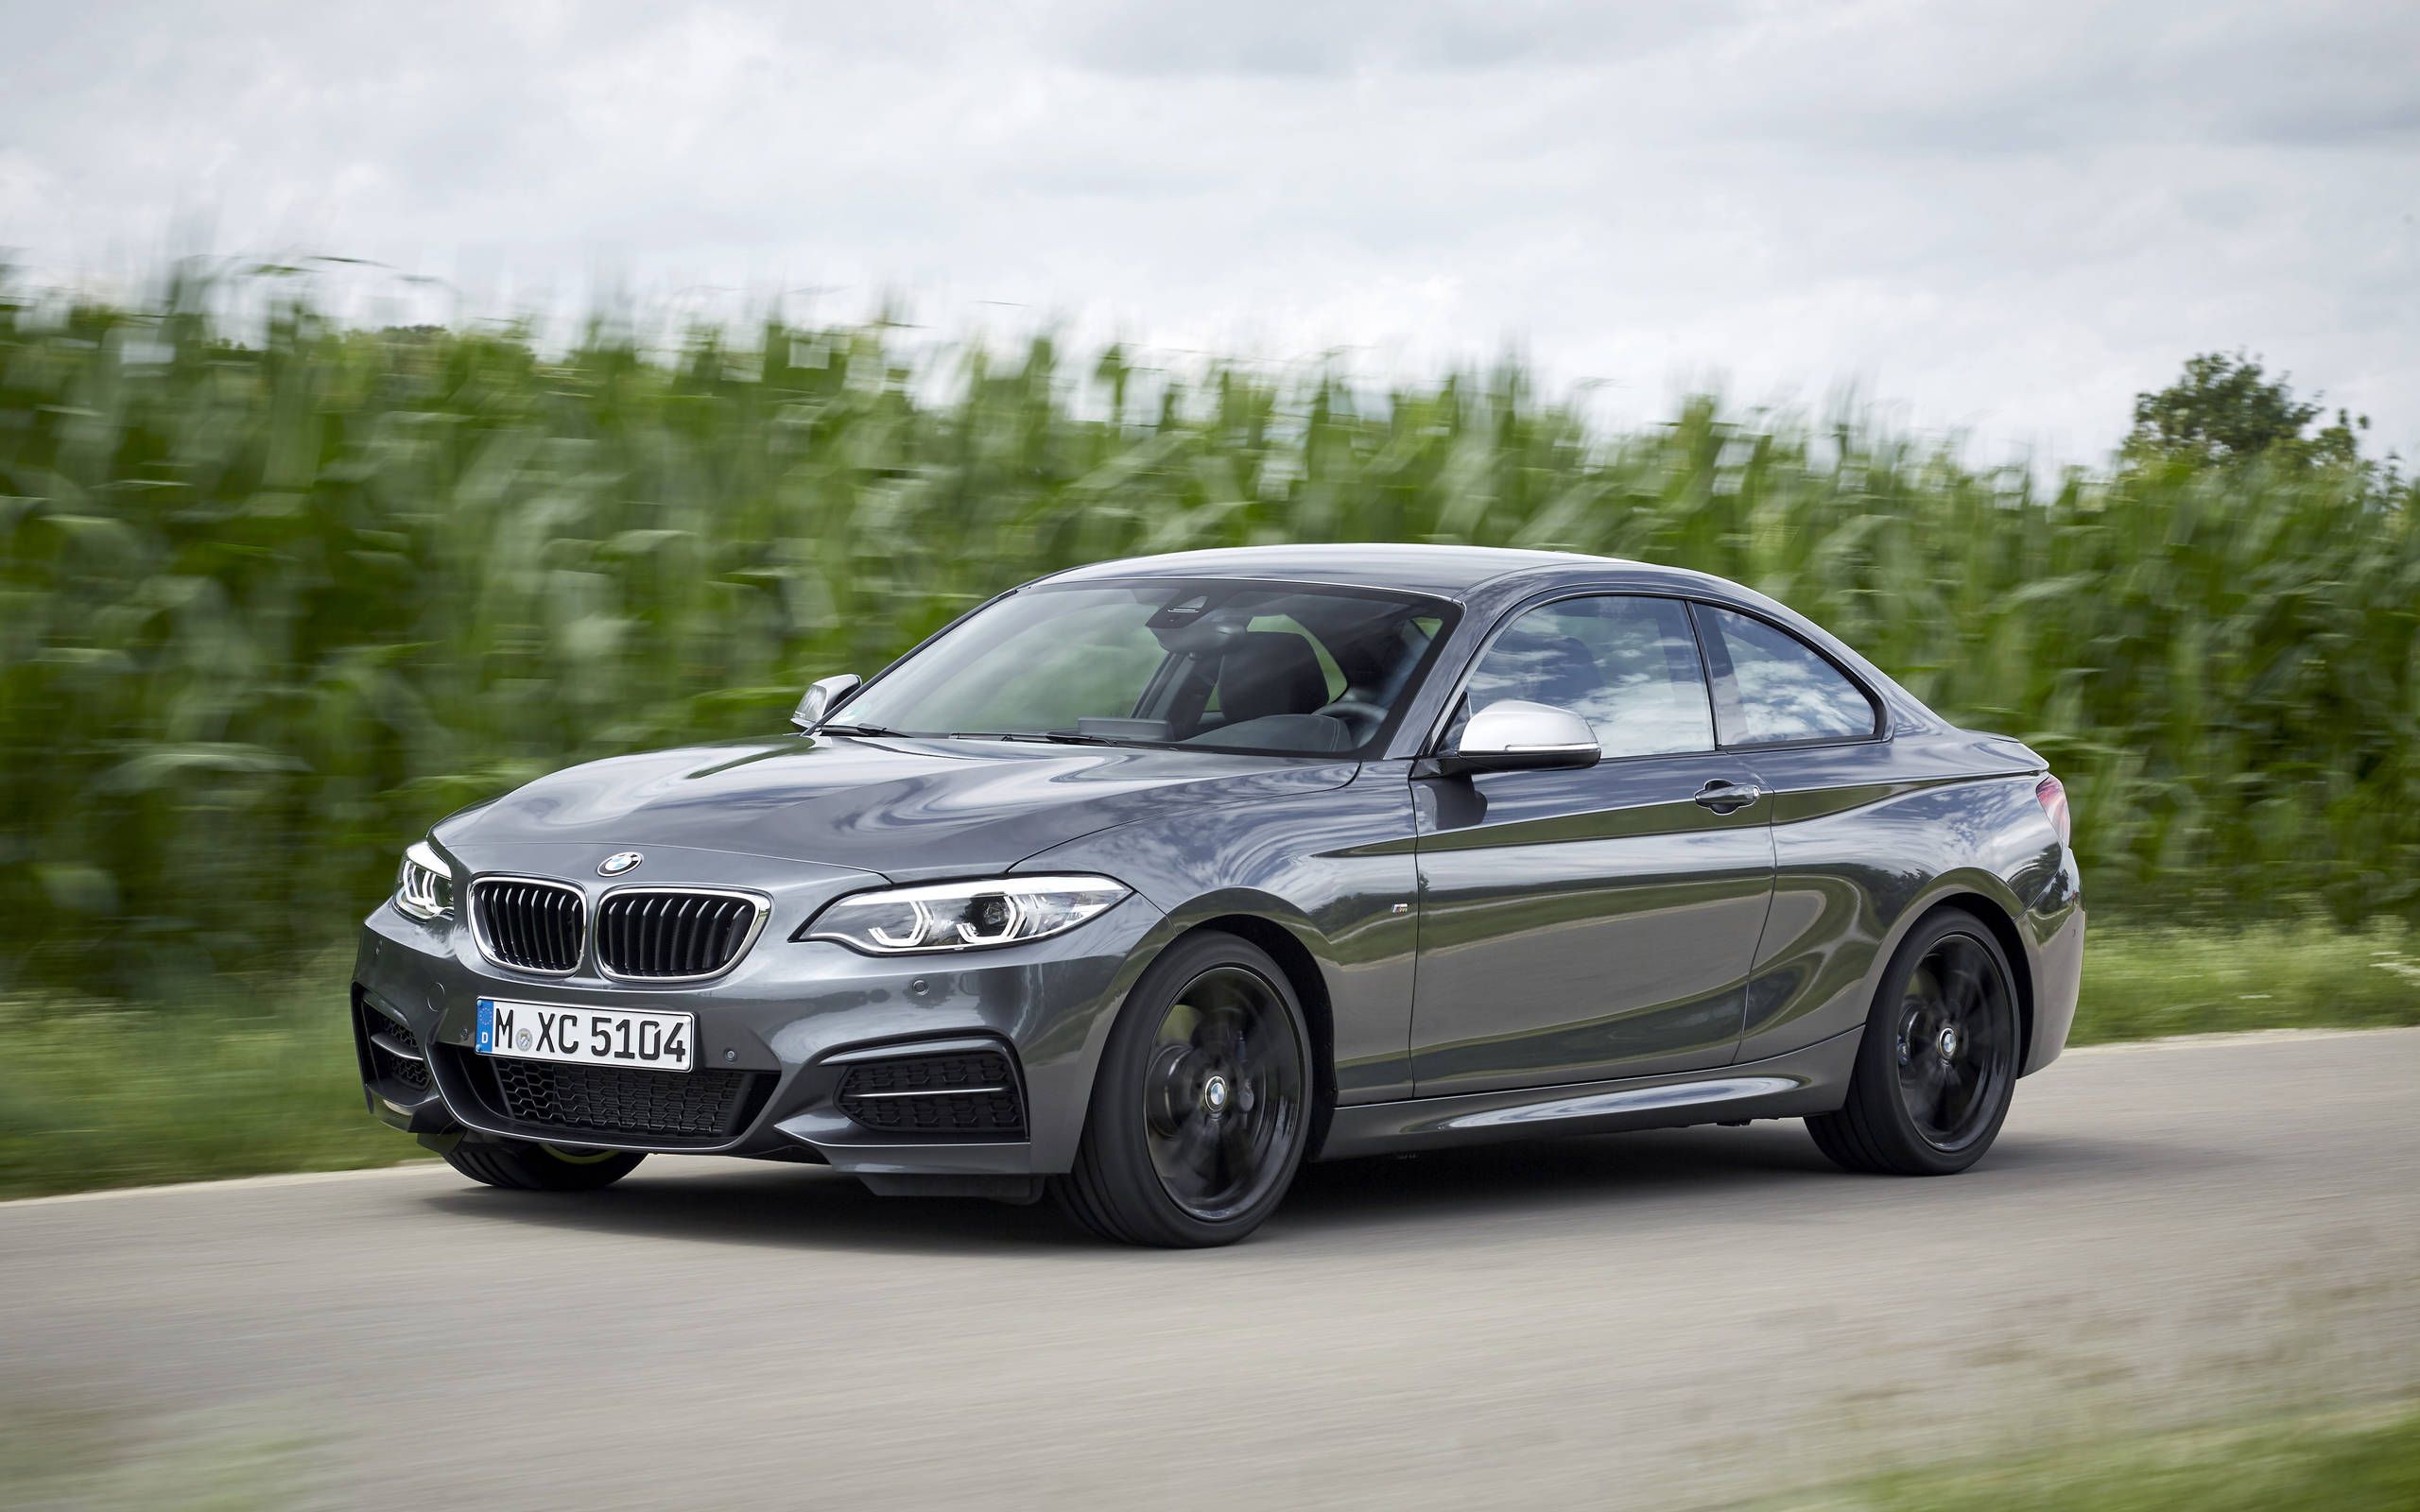 2017 Bmw M240i Review One Of The Best Cars You Can Buy Today